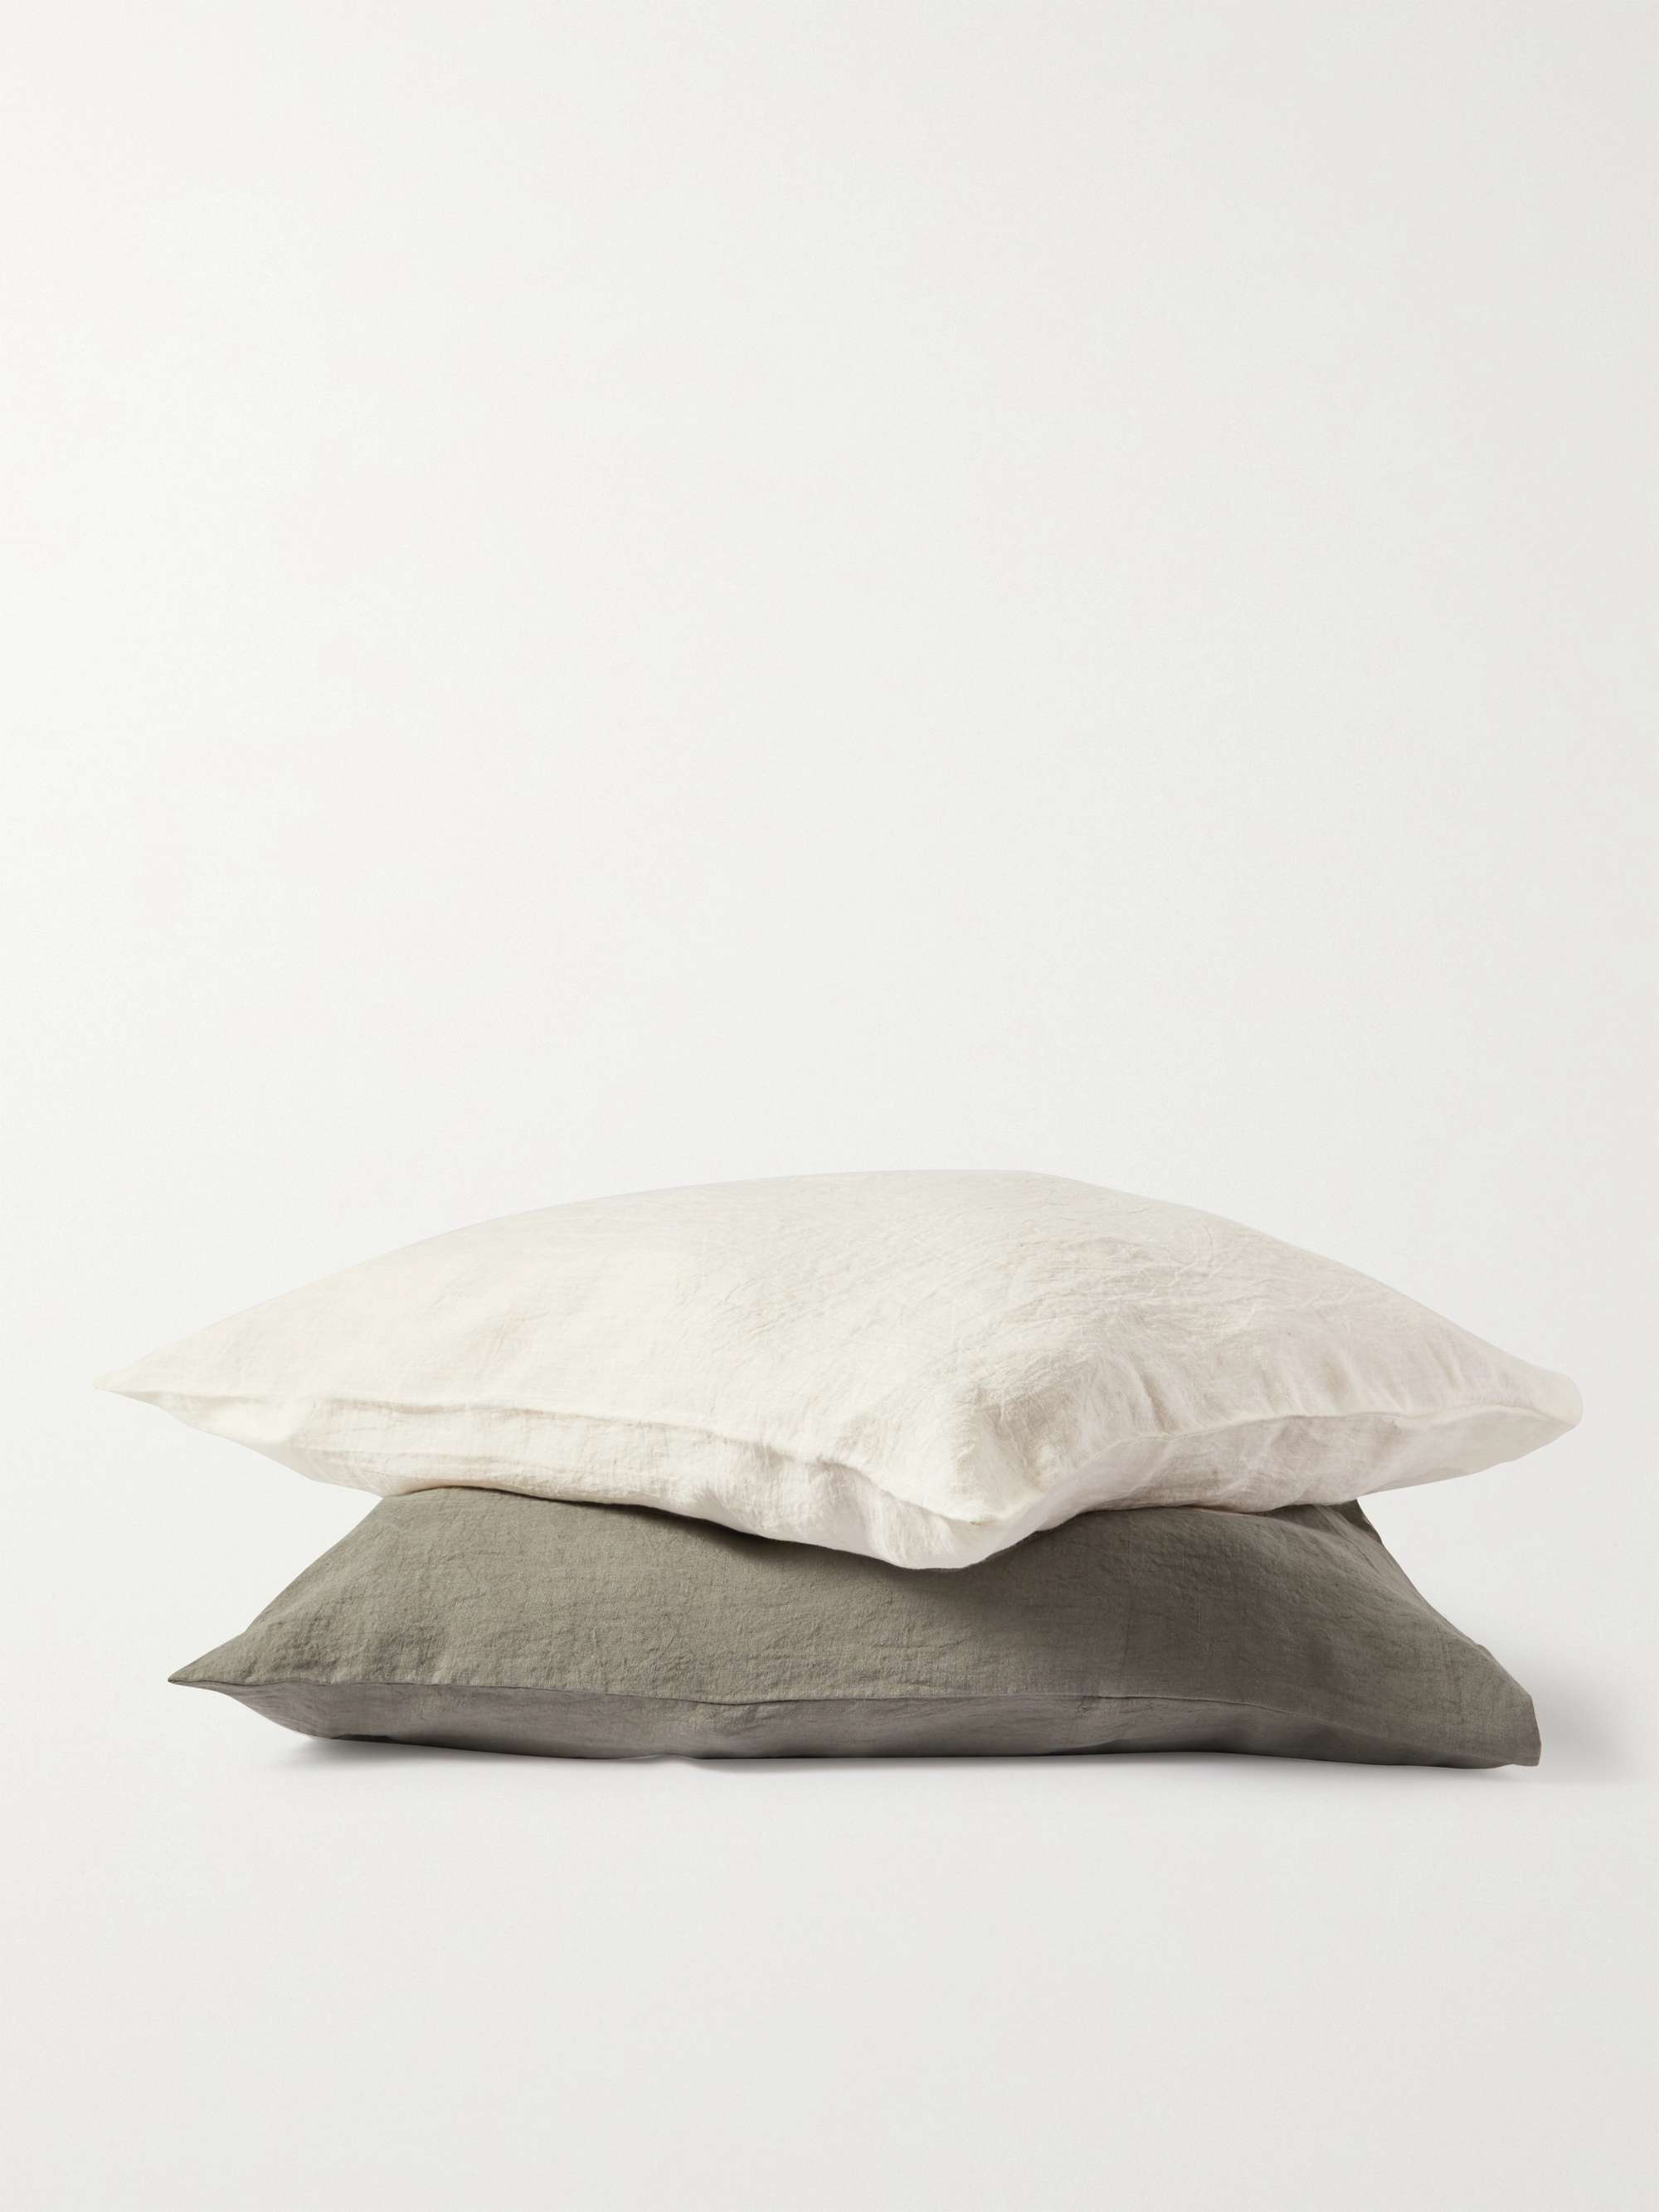 BY JAPAN + SyuRo Large Linen Cushion Cover